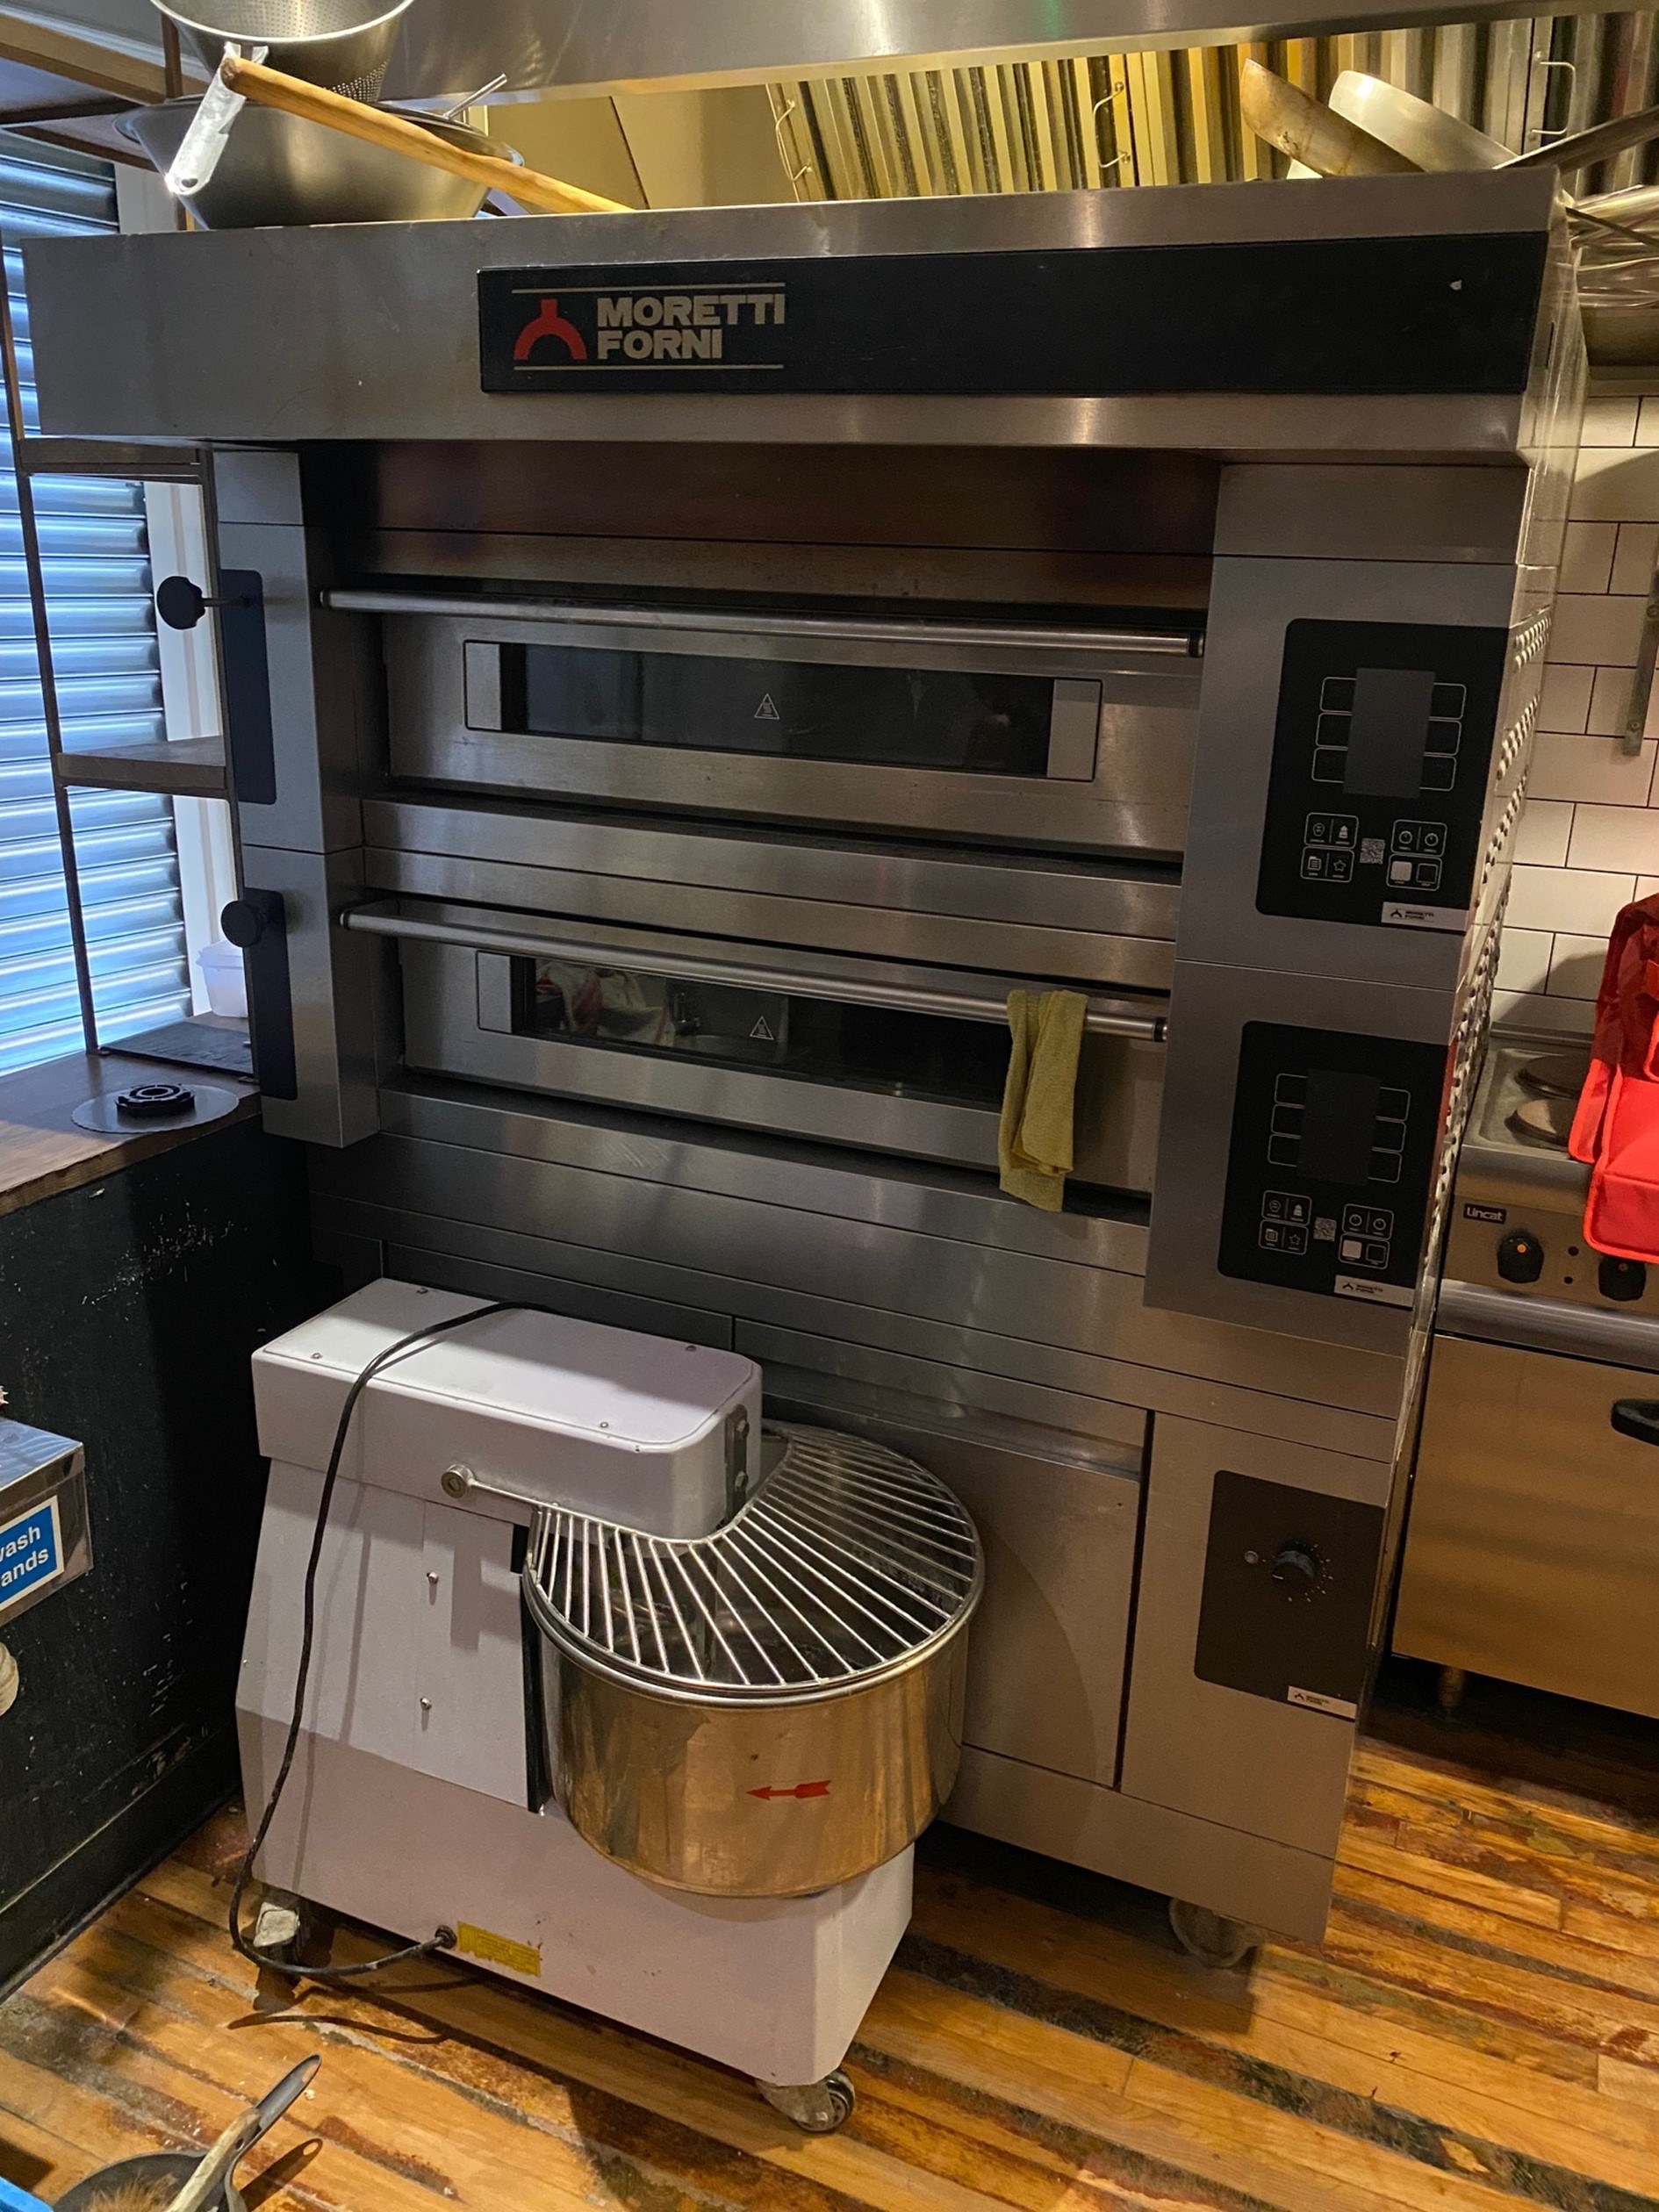 MORETI Forni S100 E Twin Deck Bakers Oven with Proover.